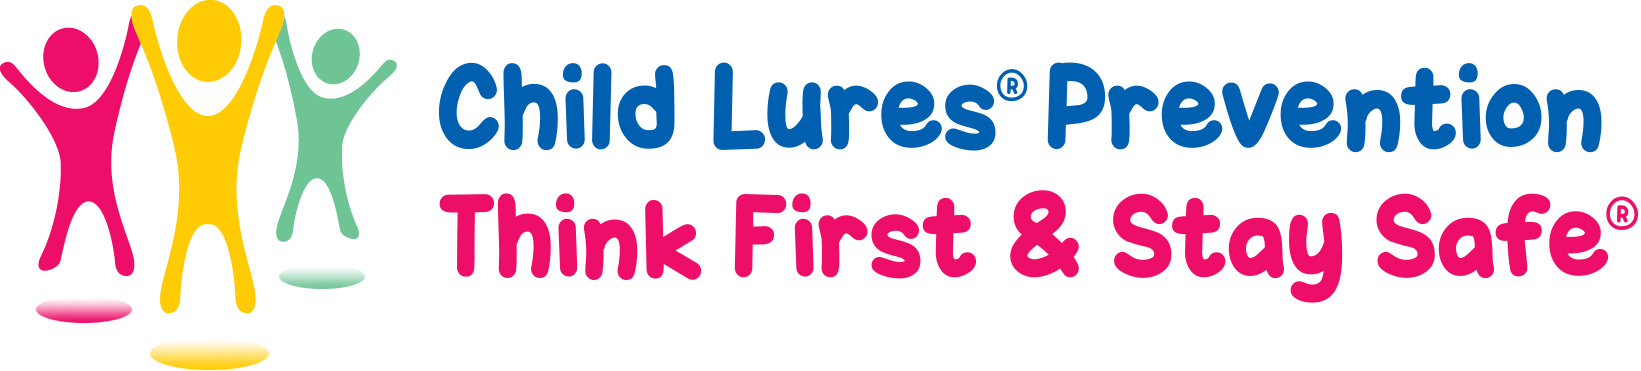 Child Lures® Prevention: Think First and Stay Safe